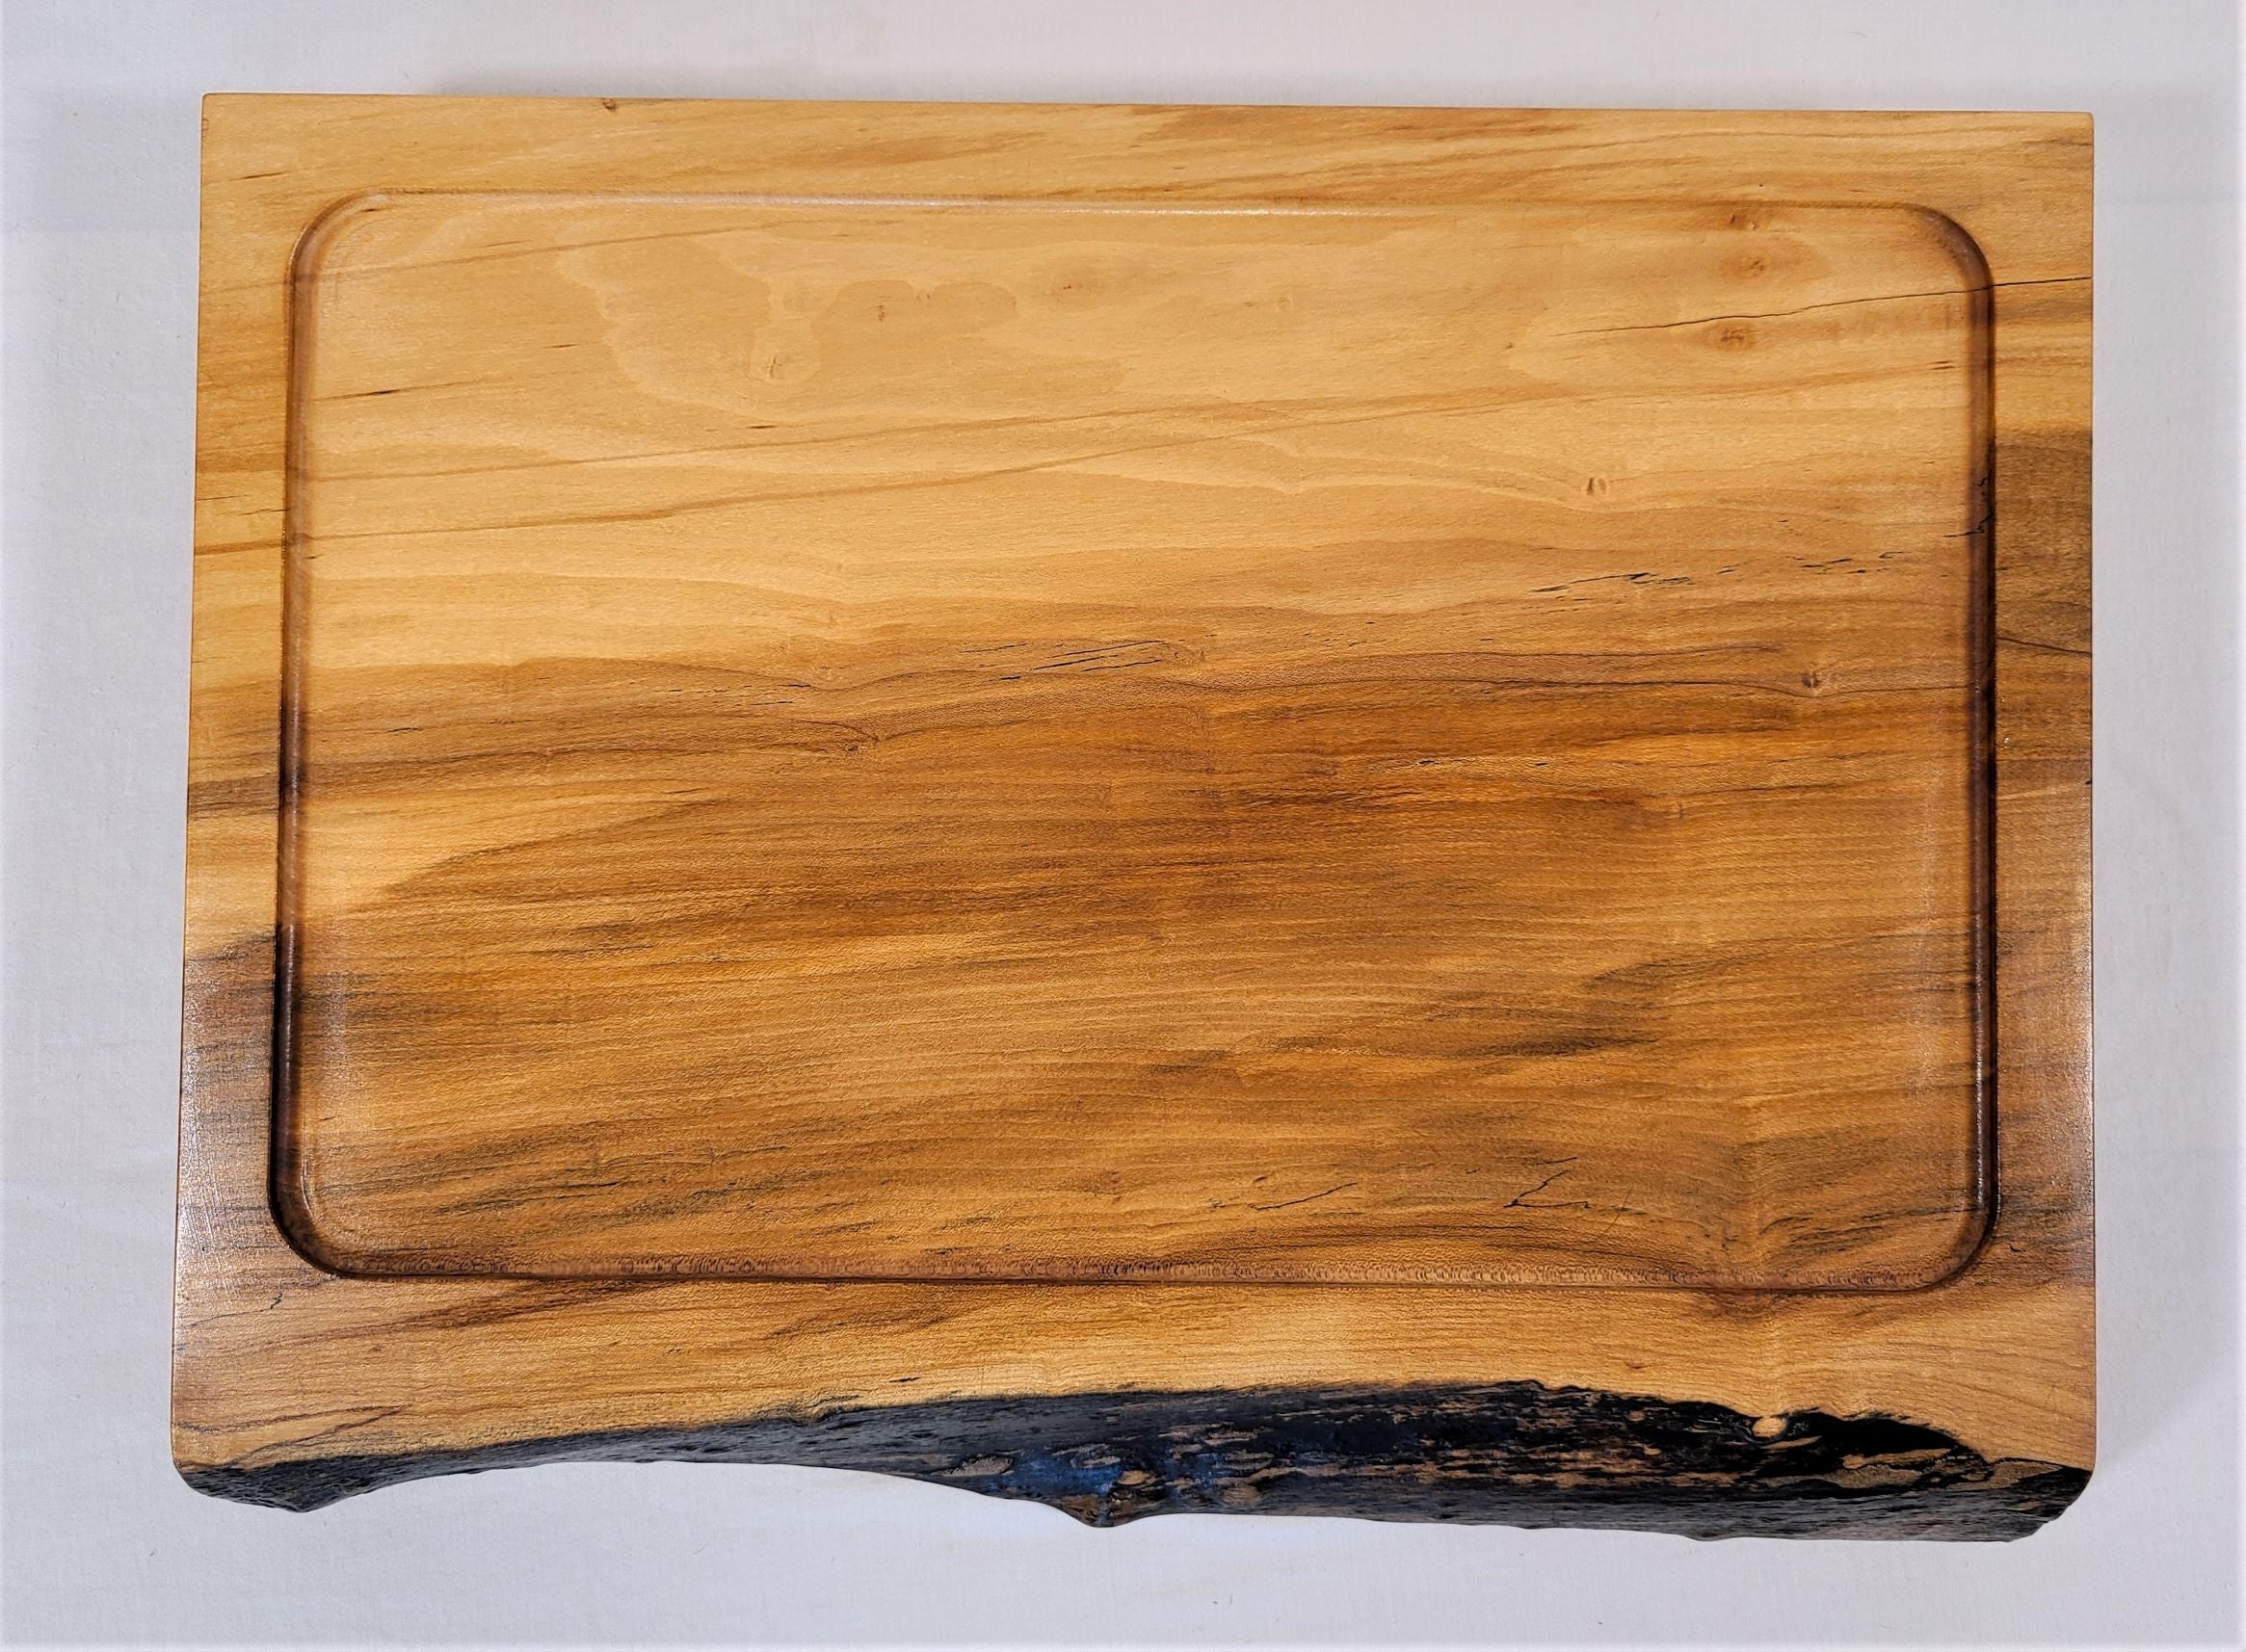 Top view of a custom made large cutting board.  Made of a thick piece of maple this carving board can handle large meat and poultry and catch all drippings in the extra large scooped out well.  Made in USA by ZIM Boards